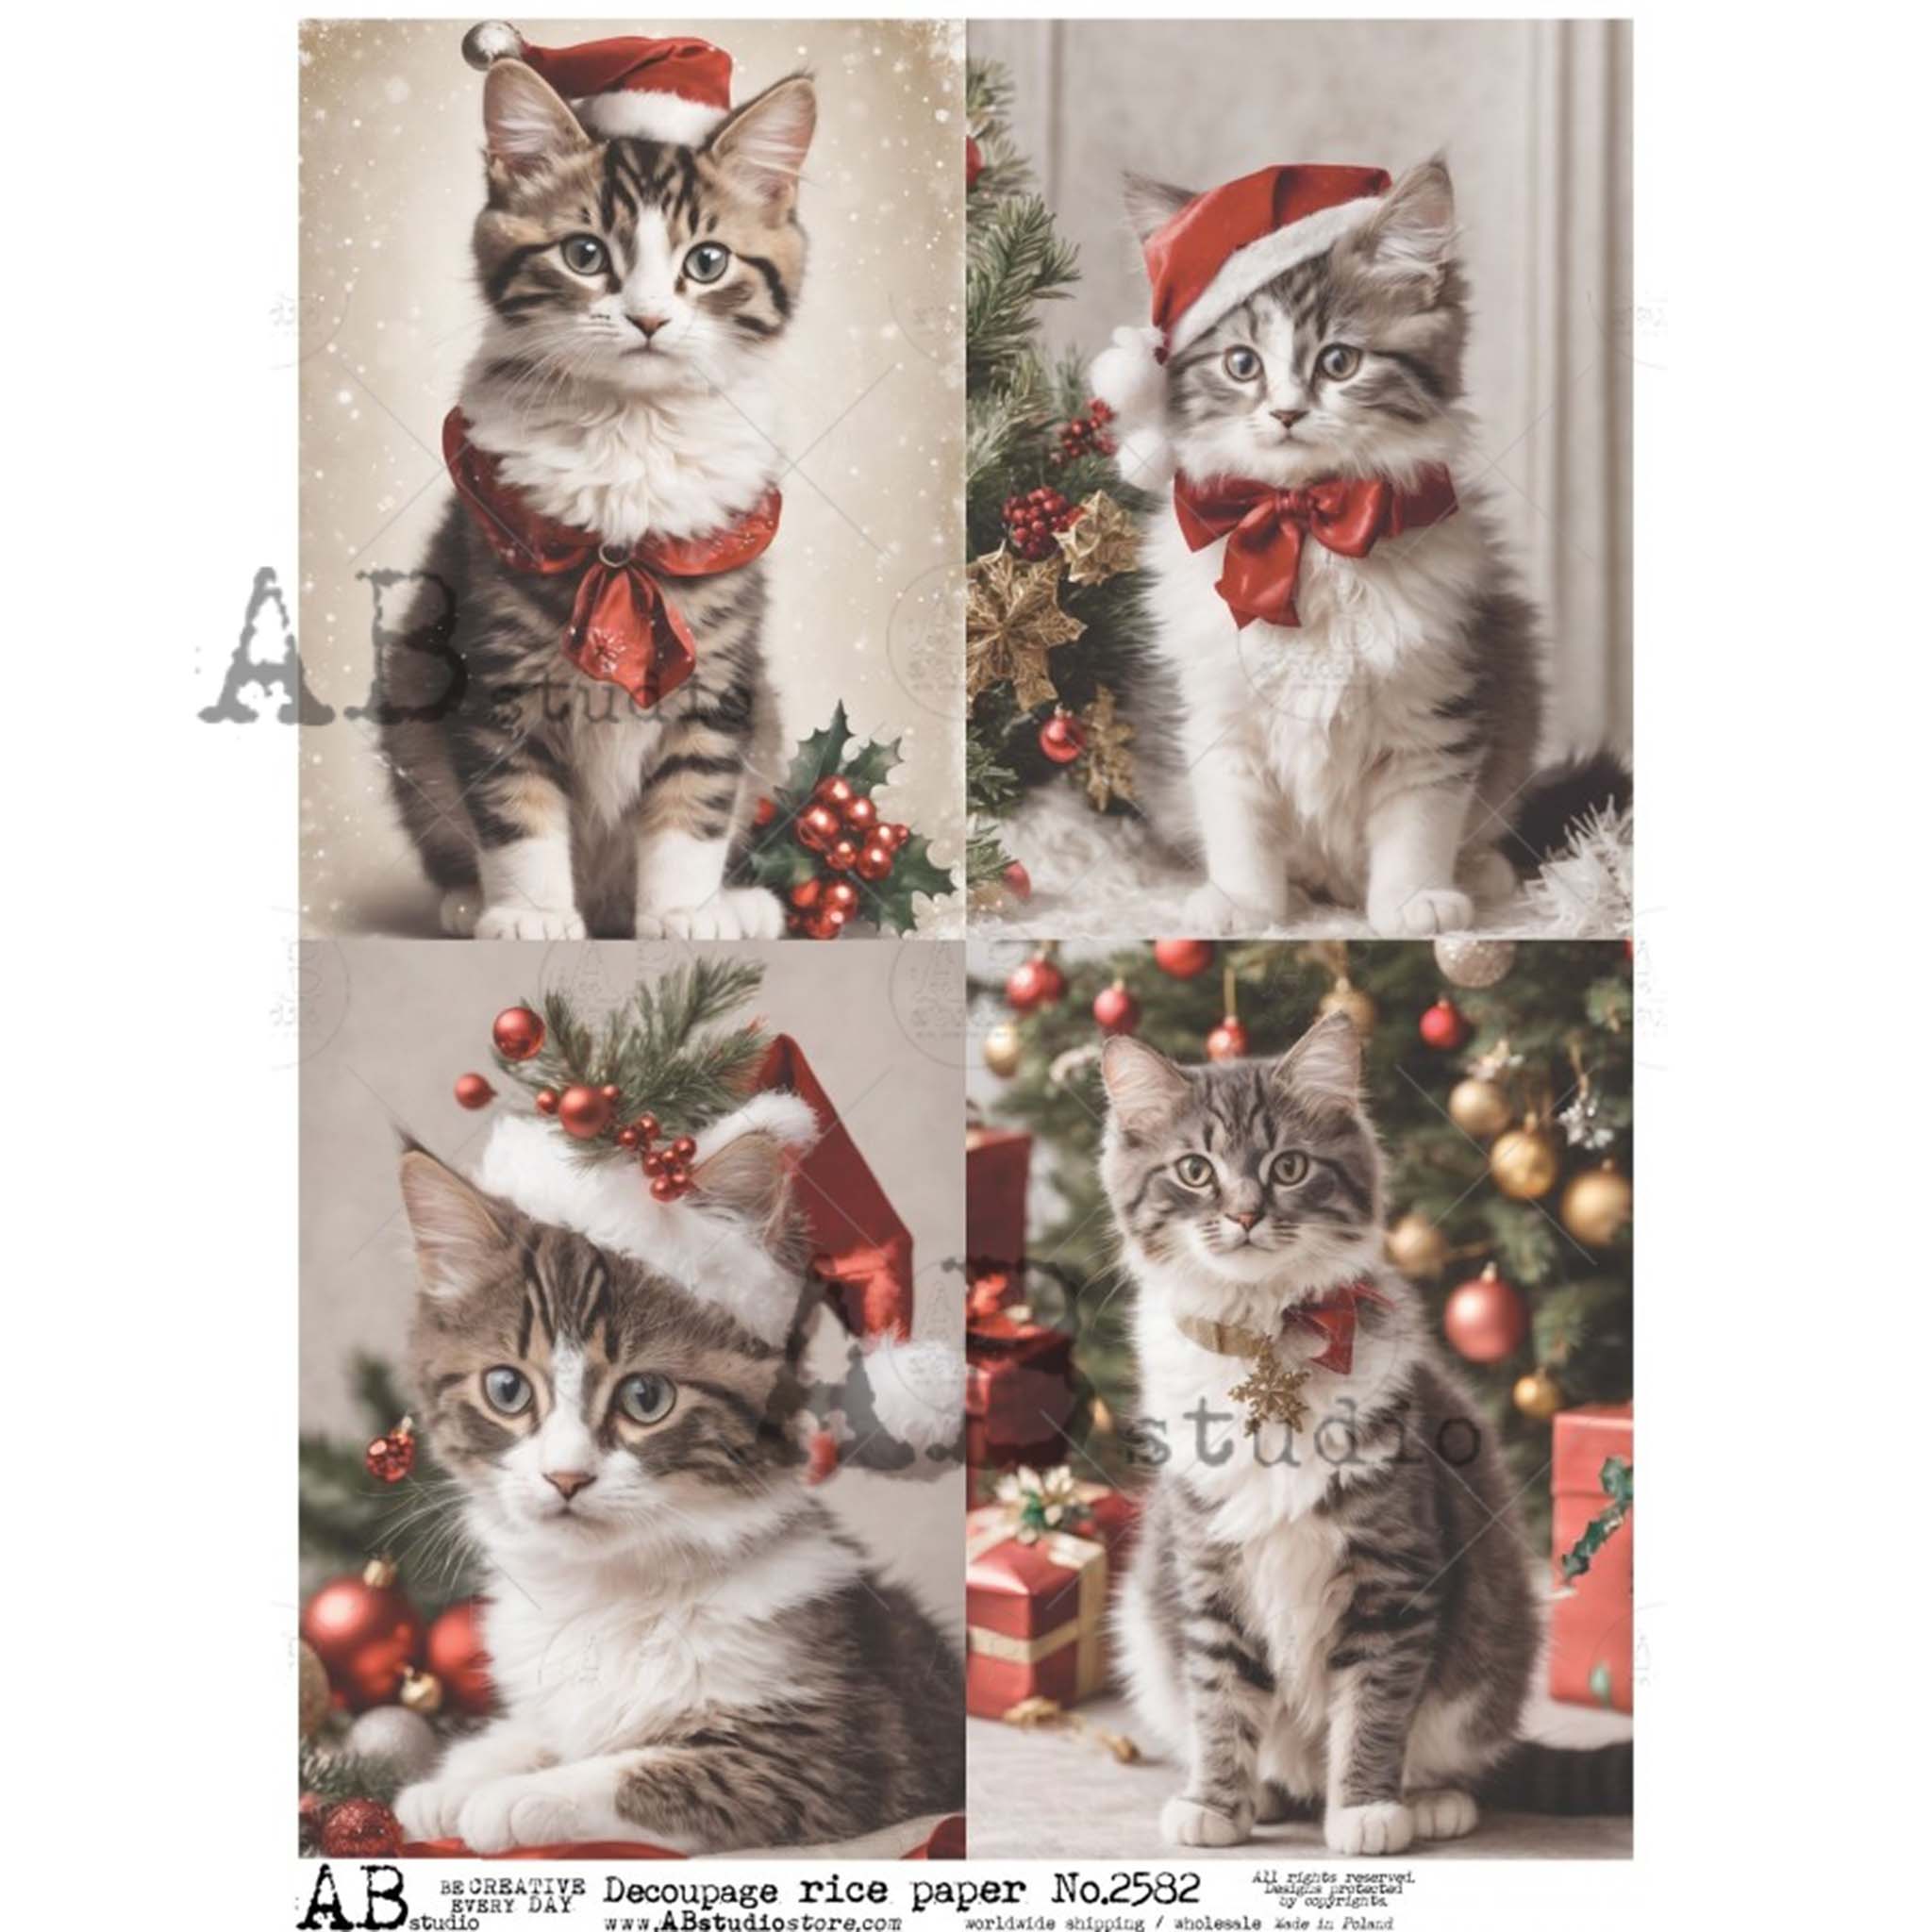 A4 rice paper design featuring four designs of cuddly kittens in classic Christmas colors wearing Santa hats and ribbon collars is against a white background.